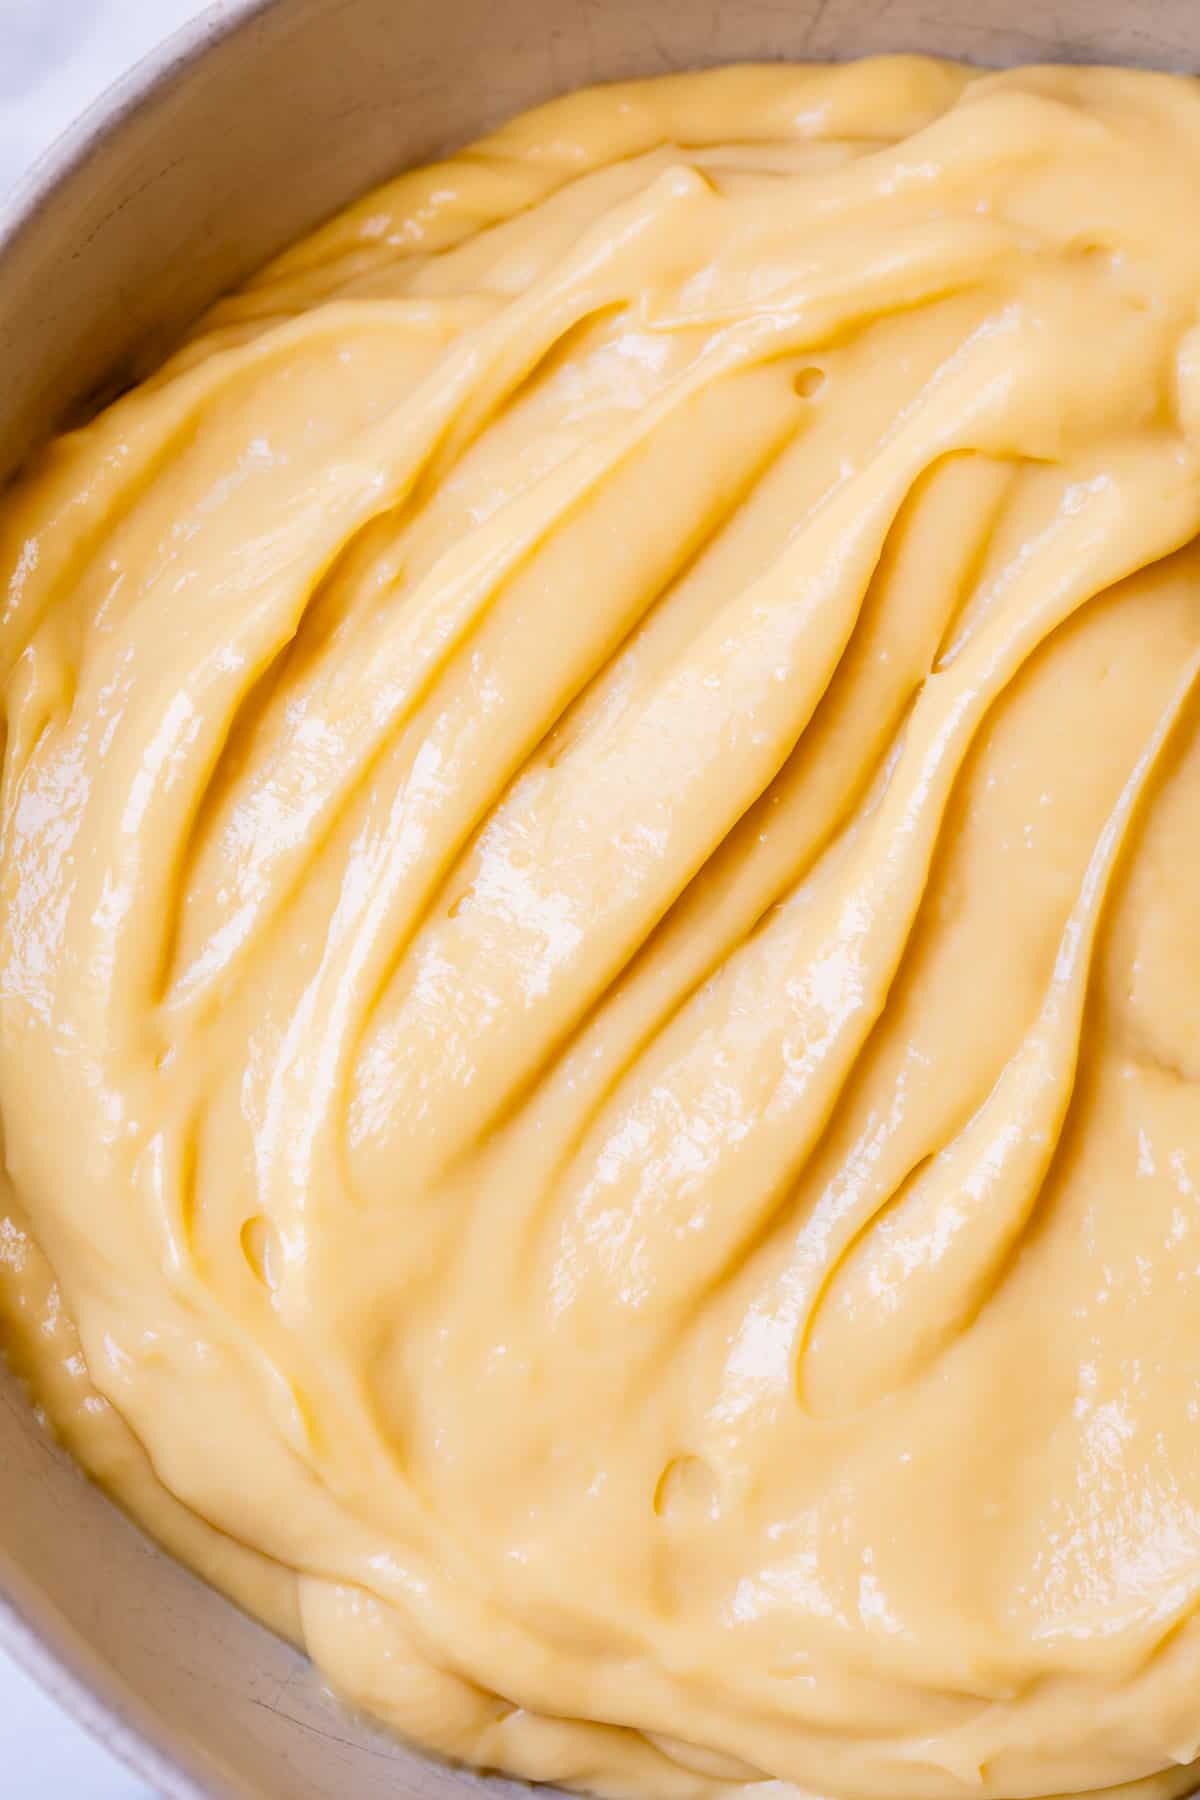 close up of pastry cream mixed with whipped cream called Crème Légère, for filling donuts.